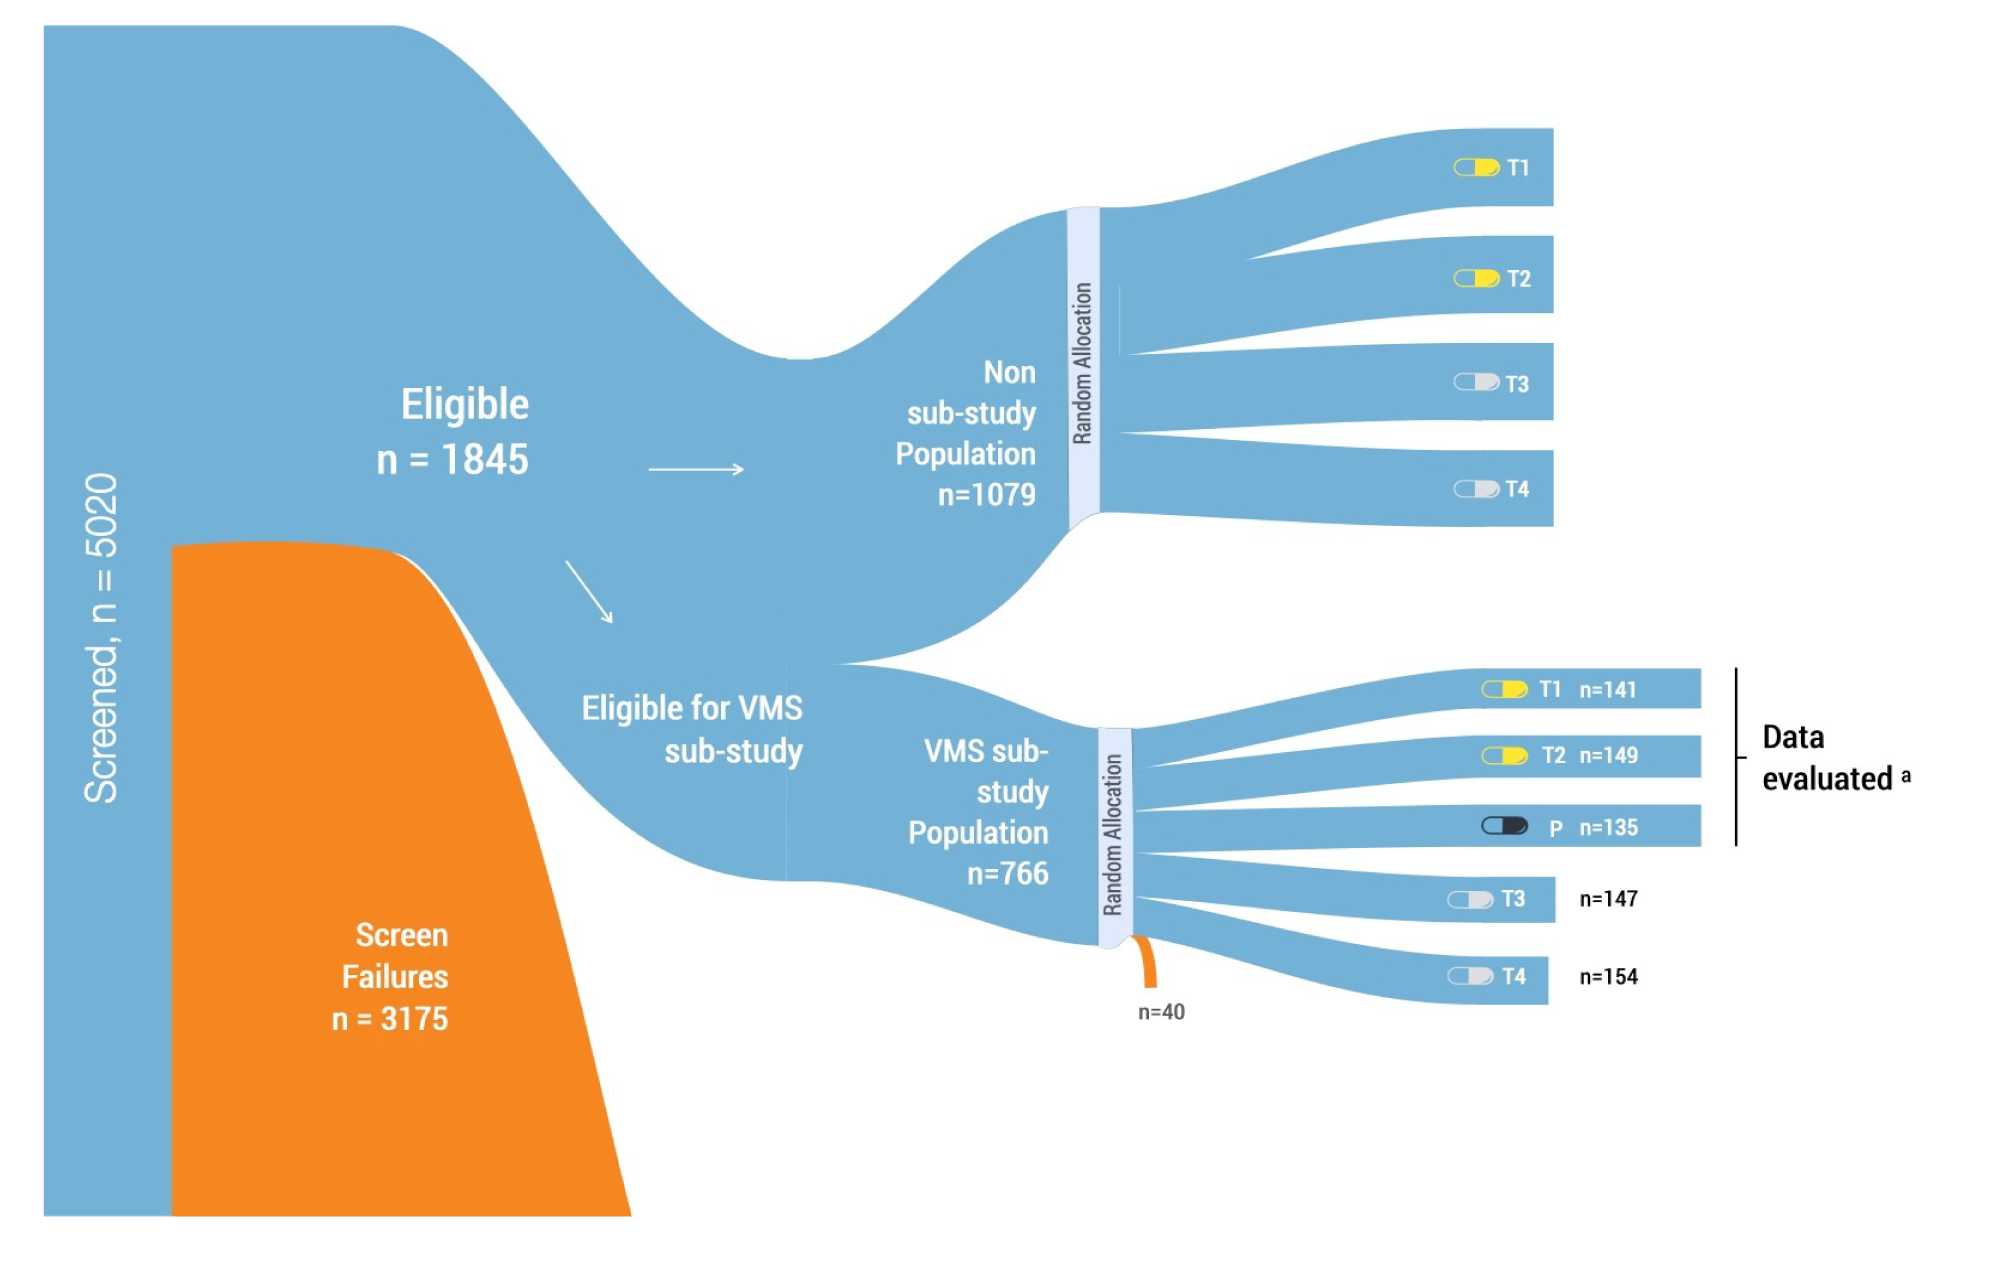 A Sankey Diagram provides the numbers and flow of the REPLENISH study, starting with 5,020 patients screened, with 1,845 eligible patients, of which 1,079 enter the non-substudy population and 766 enter the VMS substudy population.